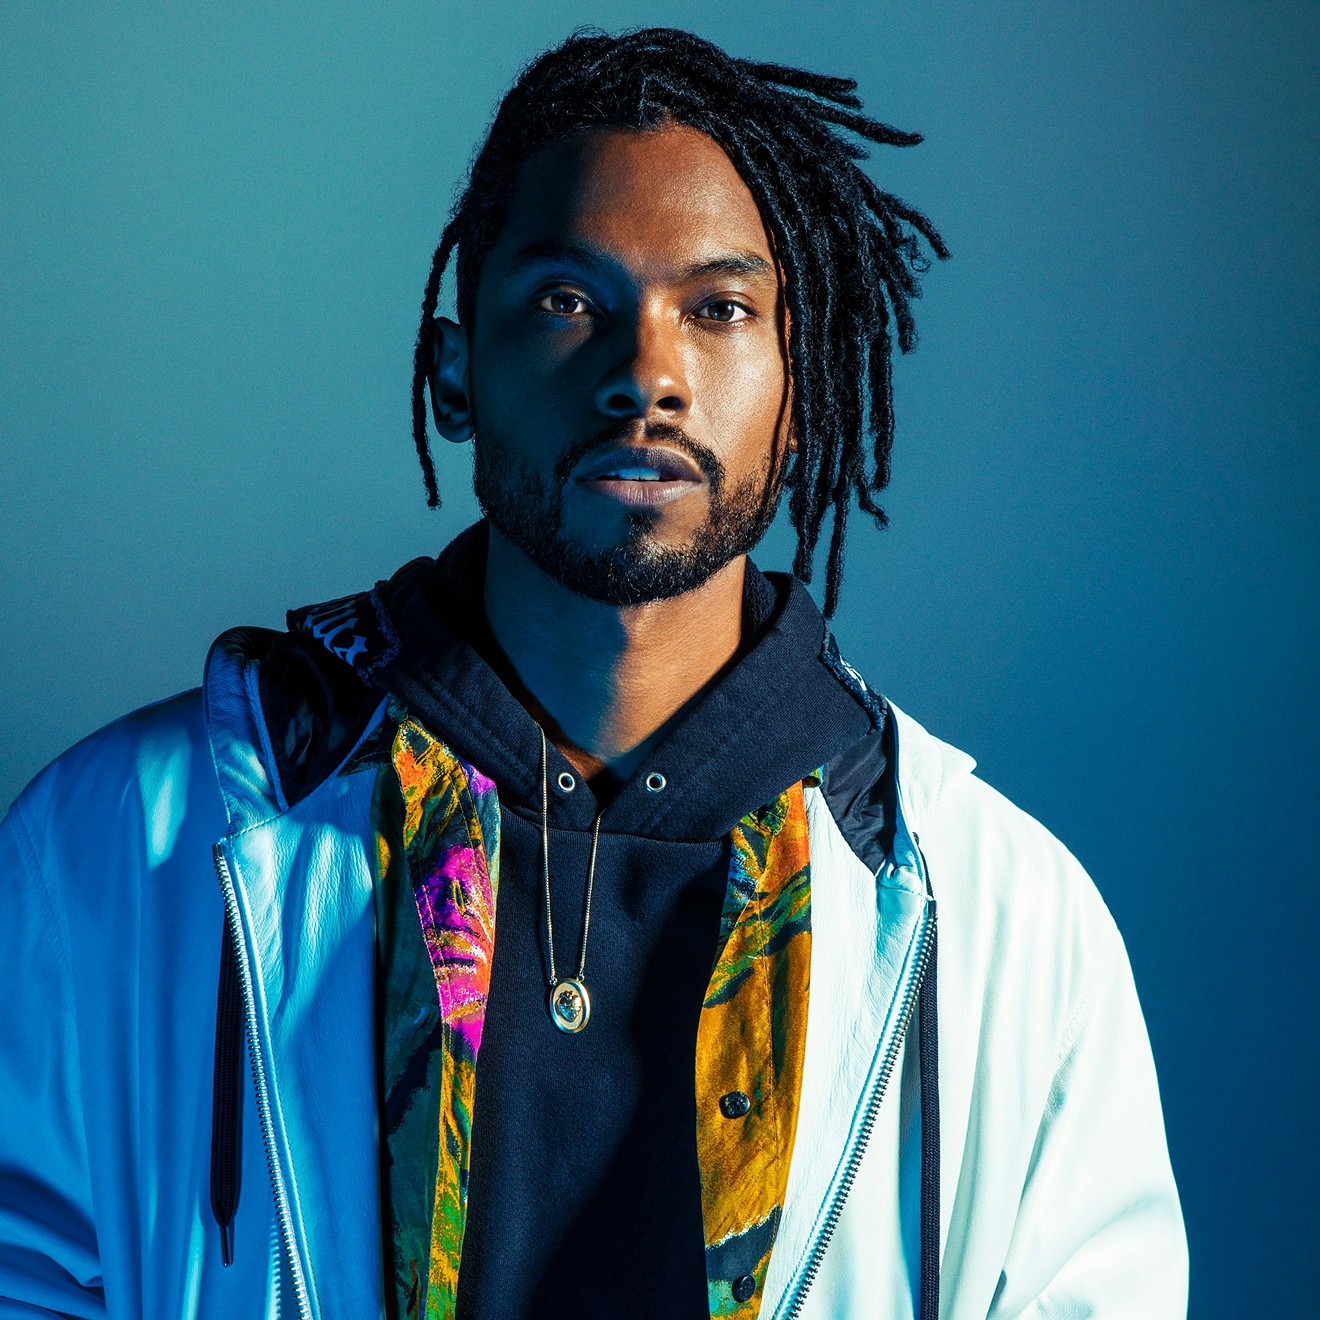 Miguel brings his sultry sounds to the Woodlands this weekend.